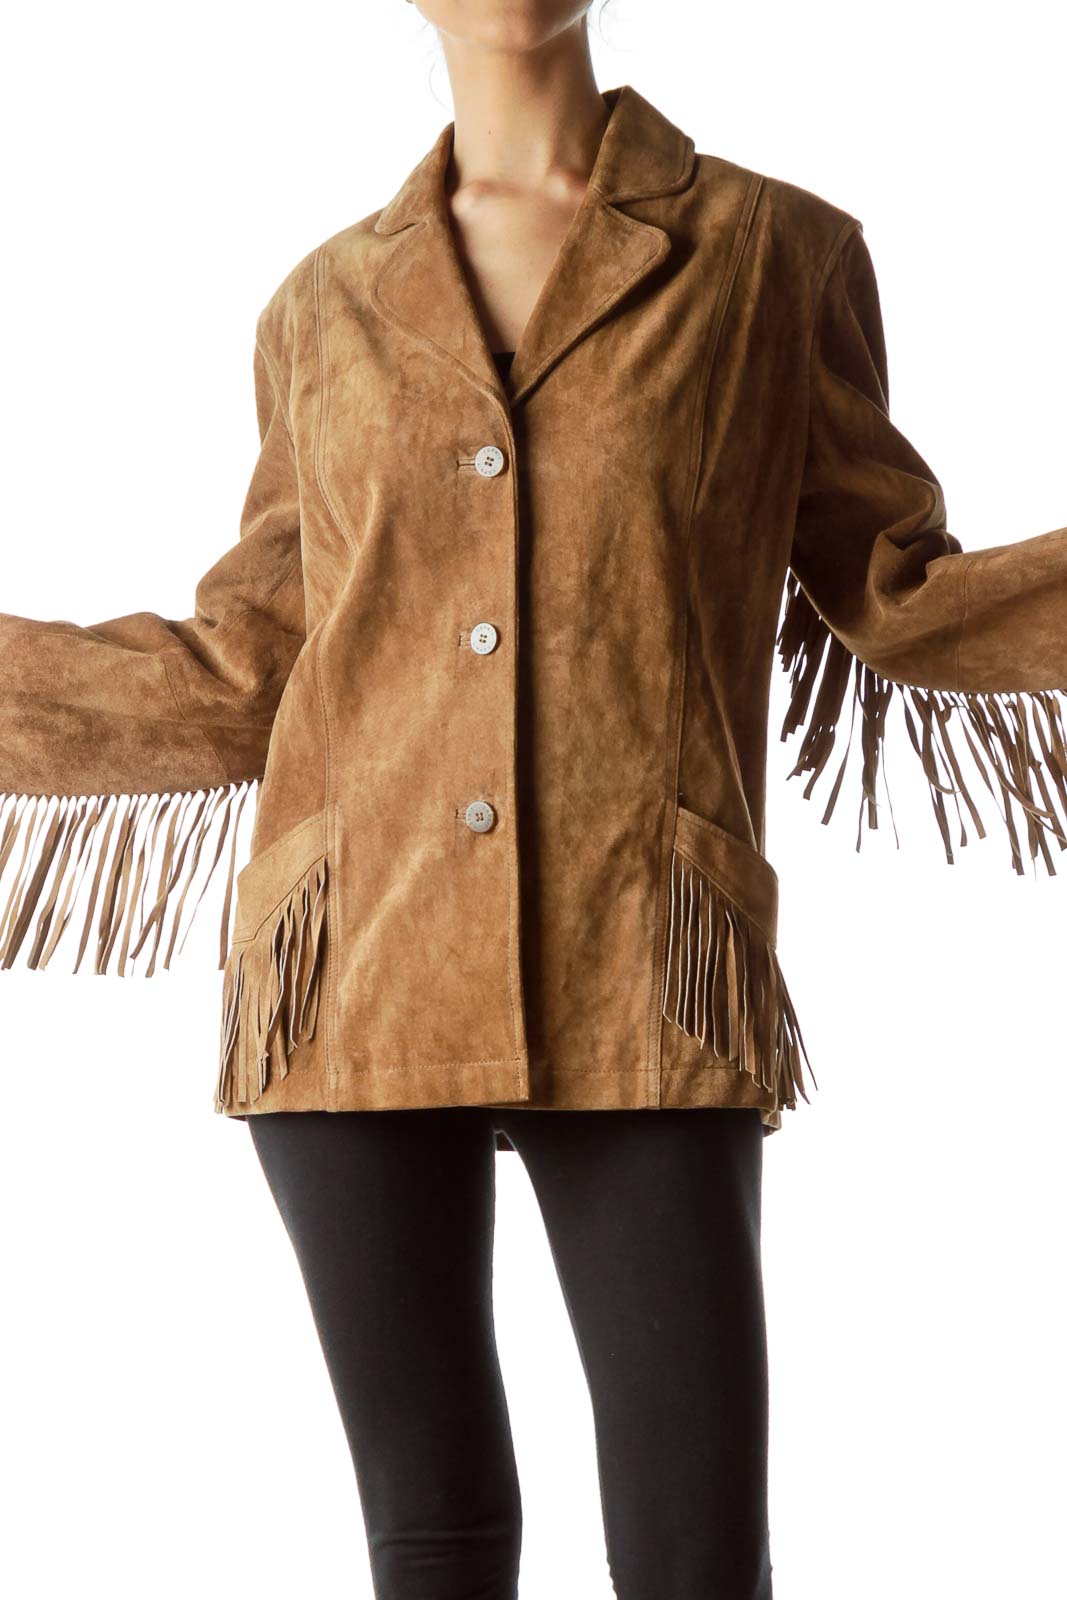 Brown Suede Leather Jacket with Fringe Front